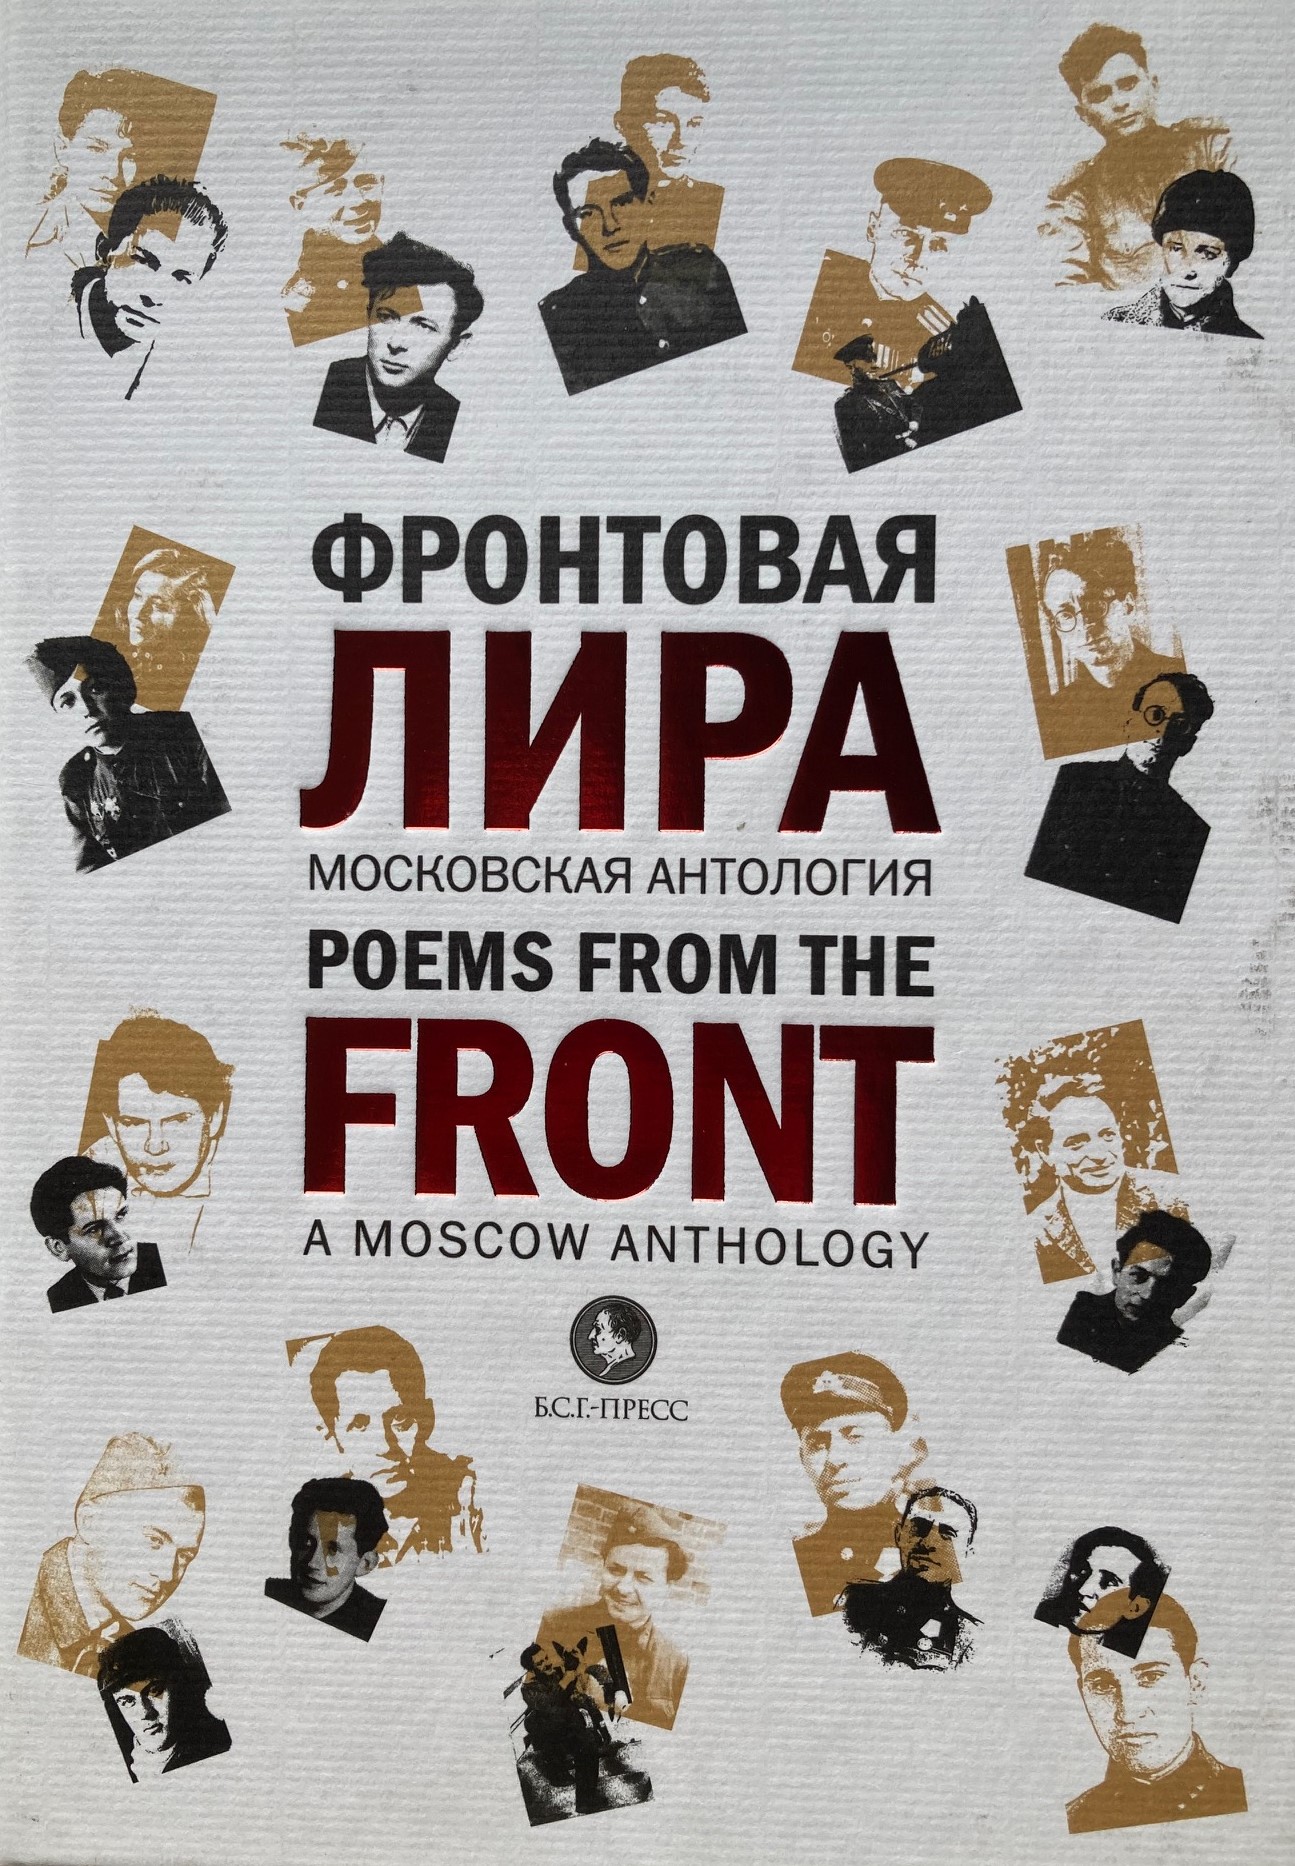 Poems from the Front: A Moscow Anthology